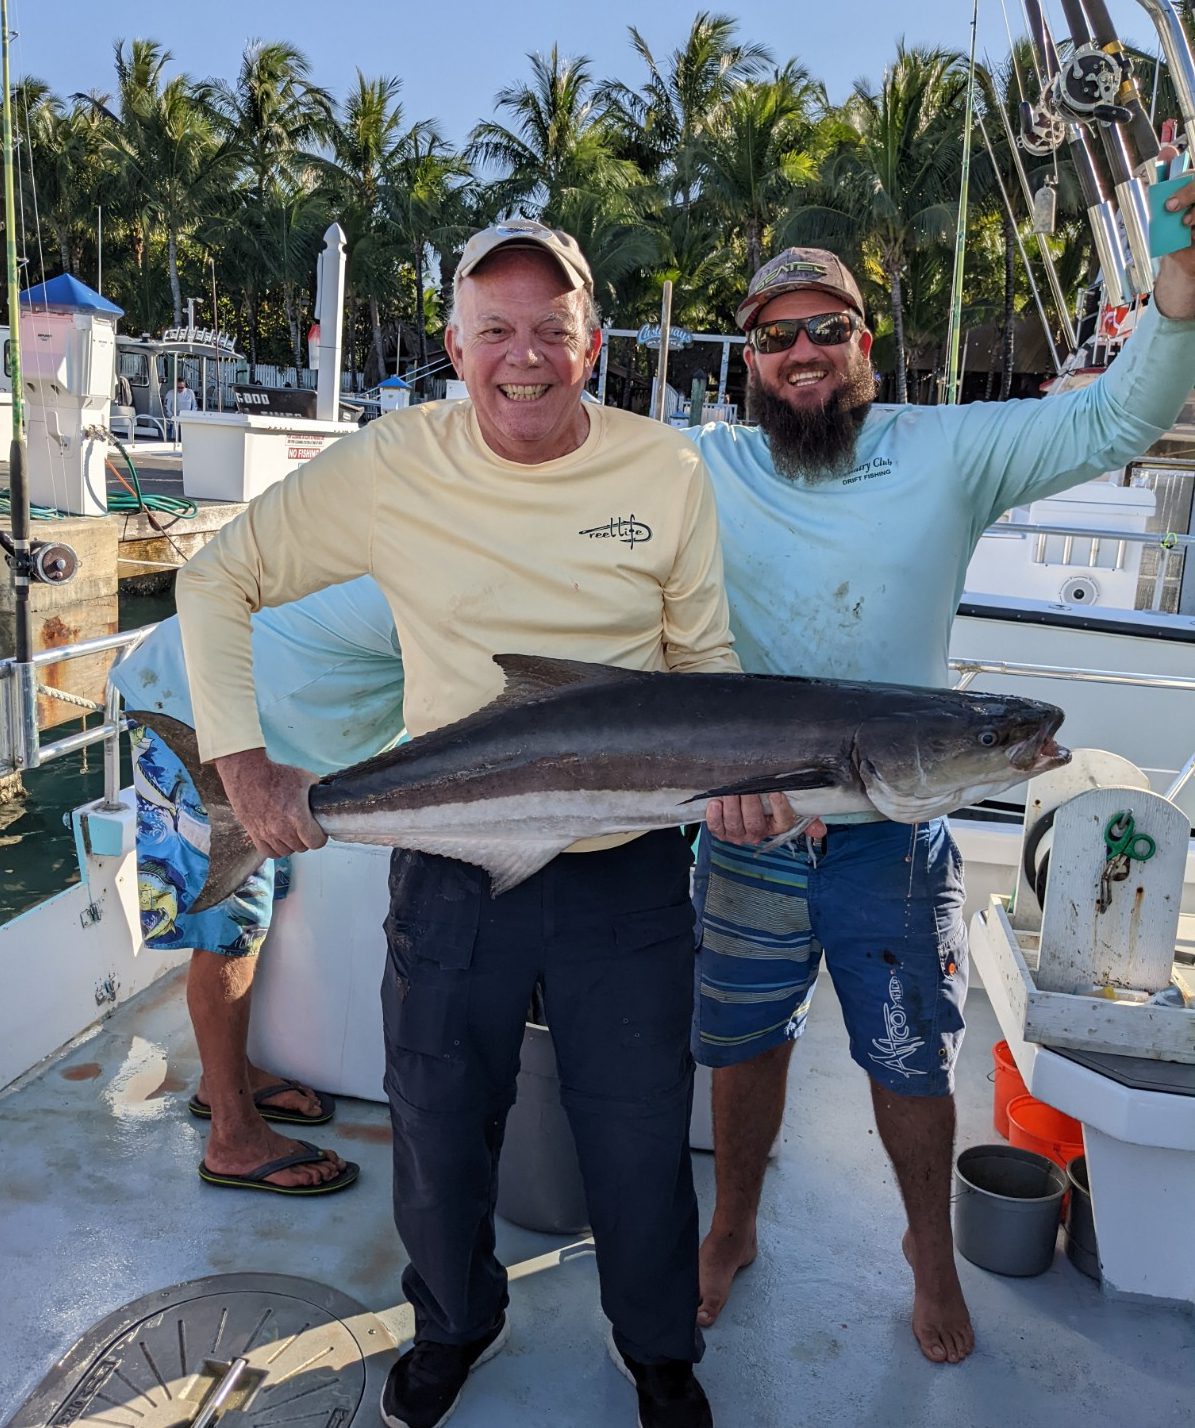 Cobia Back Deck of Country Club boat - Coastal Angler & The Angler